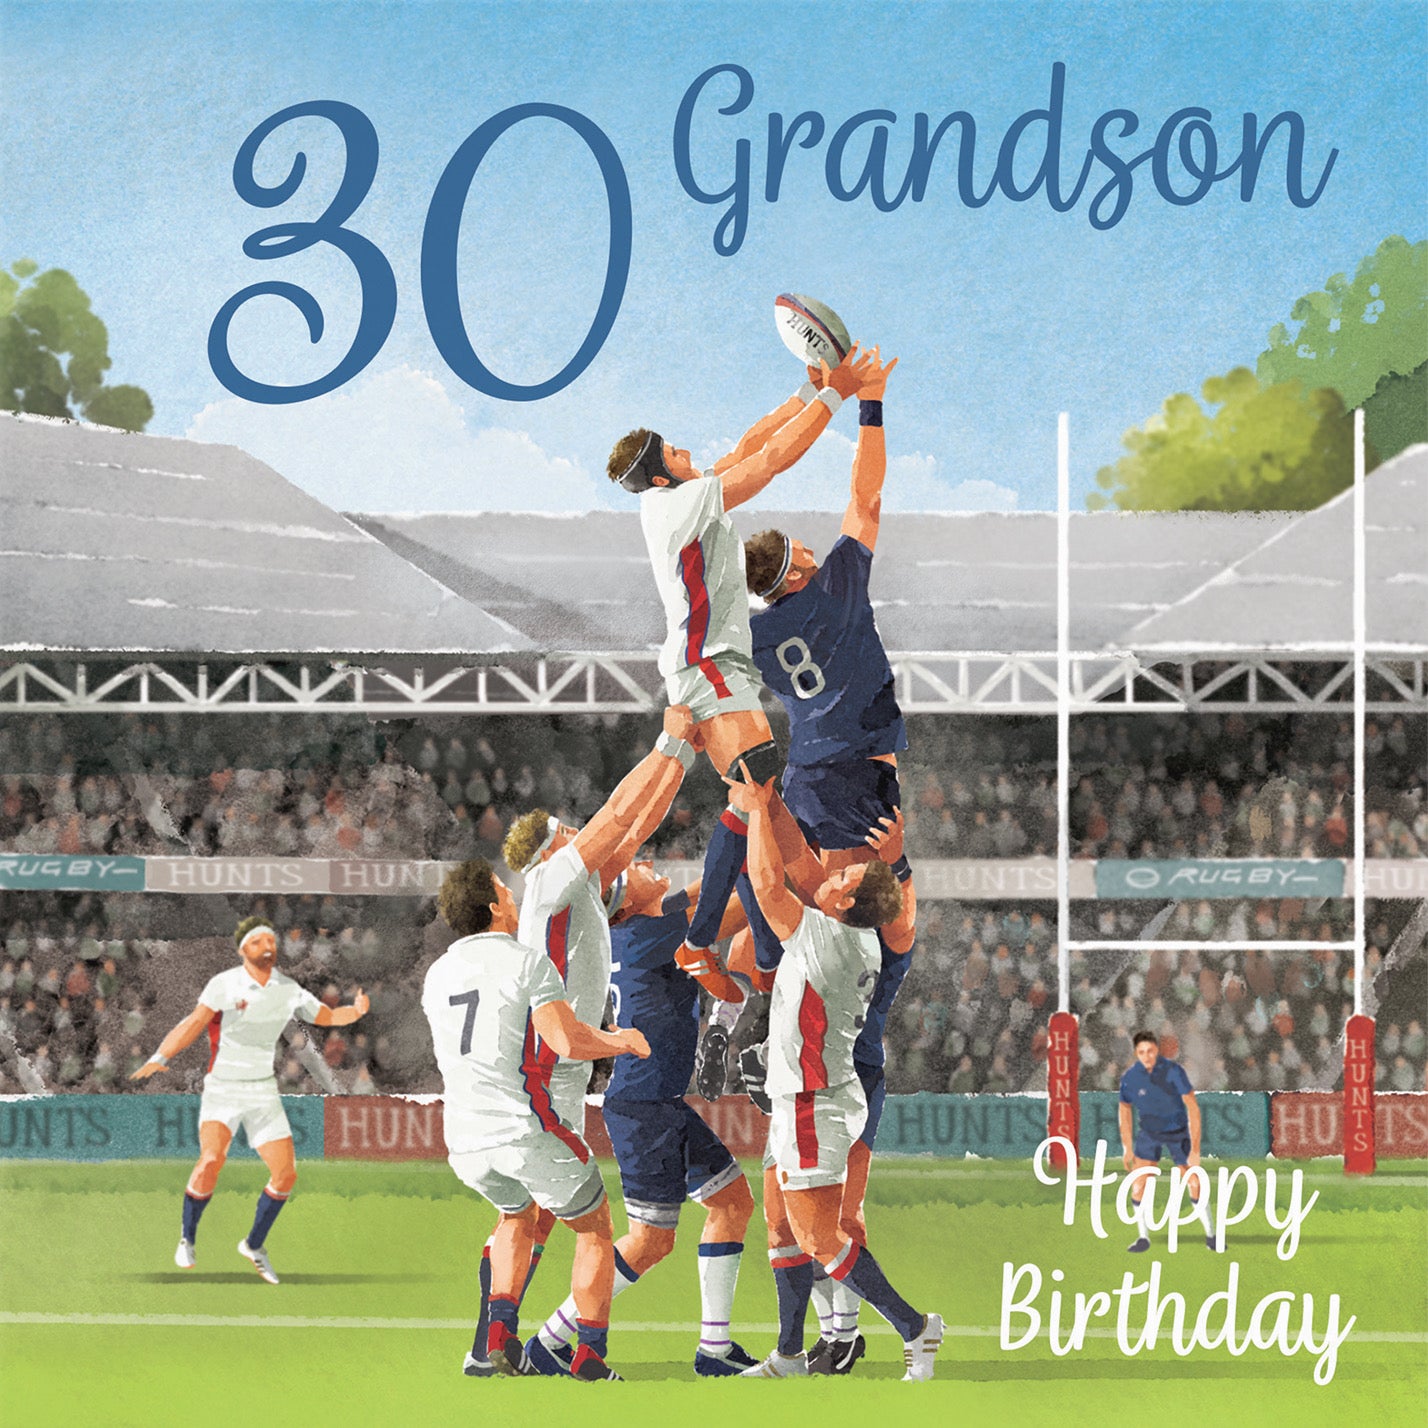 30th Grandson Rugby Birthday Card Milo's Gallery - Default Title (B0CPR54D1S)